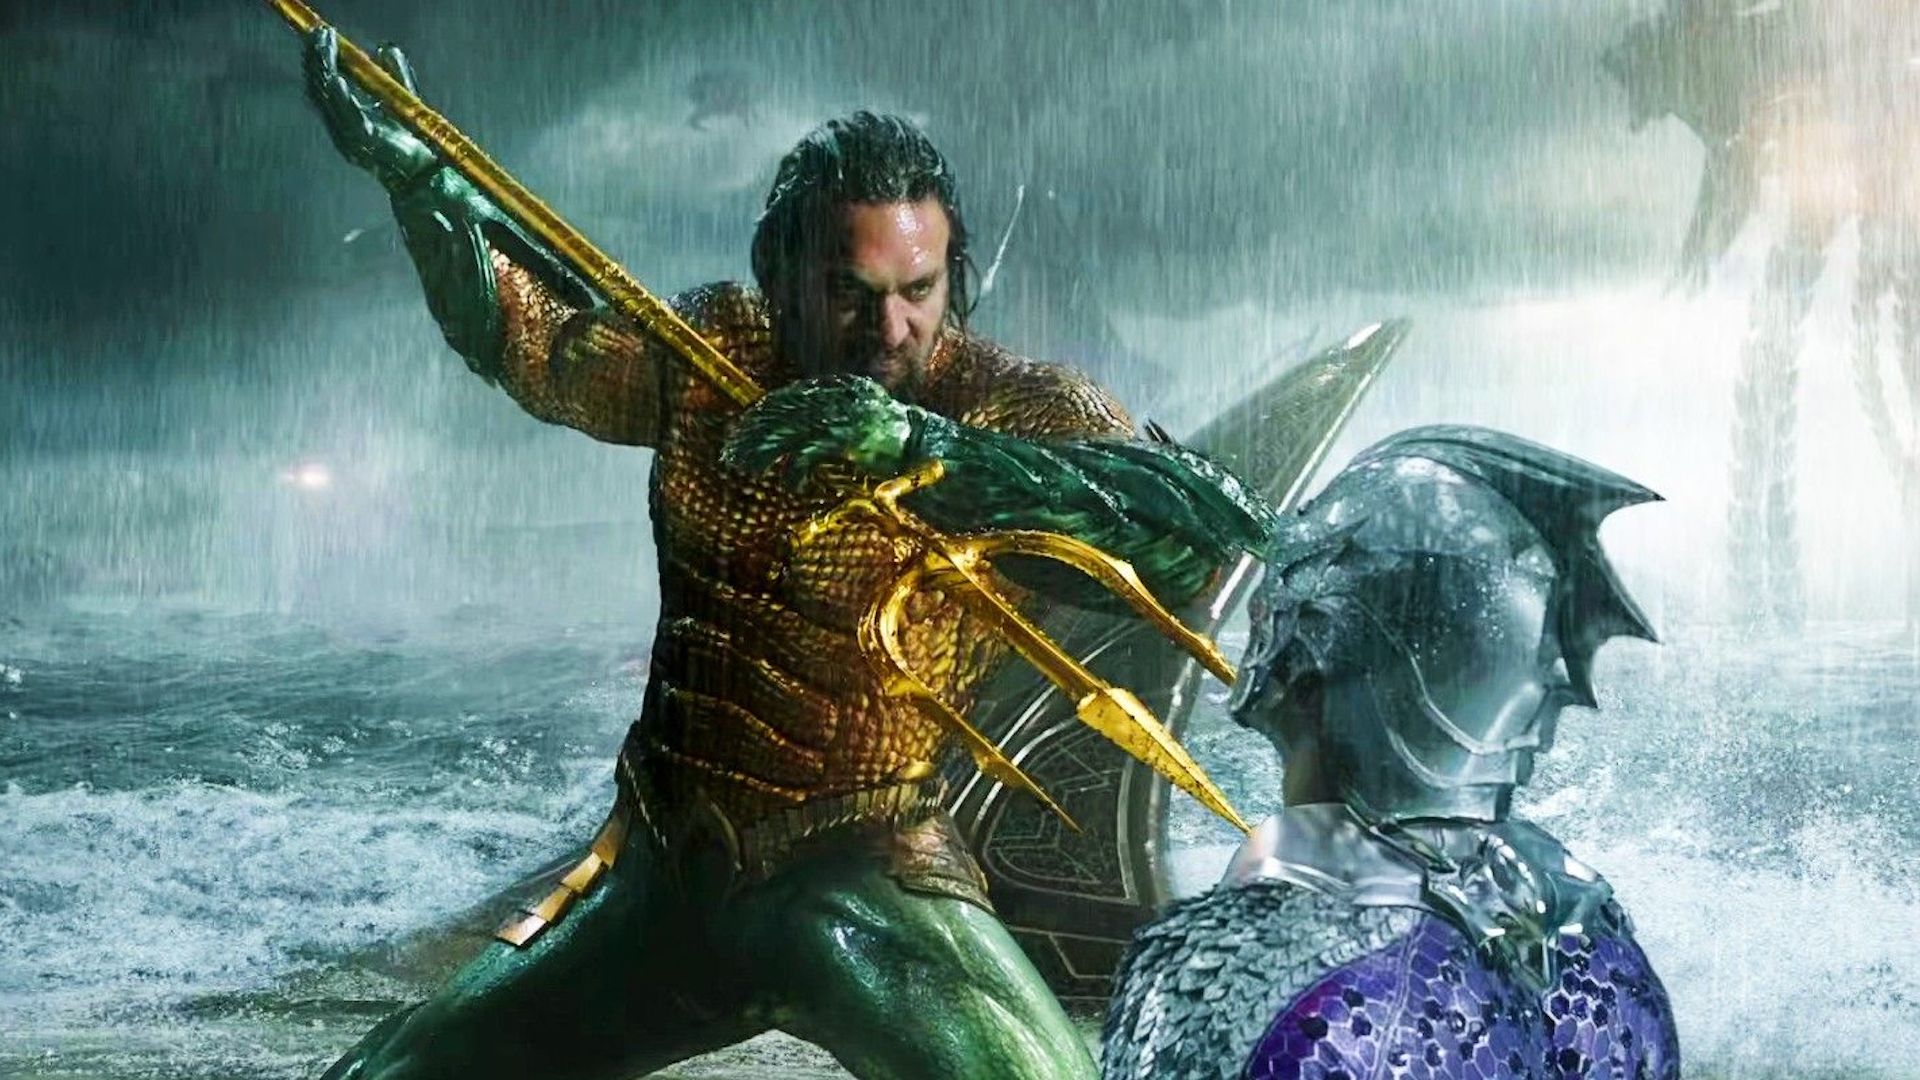 The first Aquaman movie saw Arthur Curry reluctantly taking on his role as King of Atlantis to prevent a war between the underwater kingdom and the surface world.